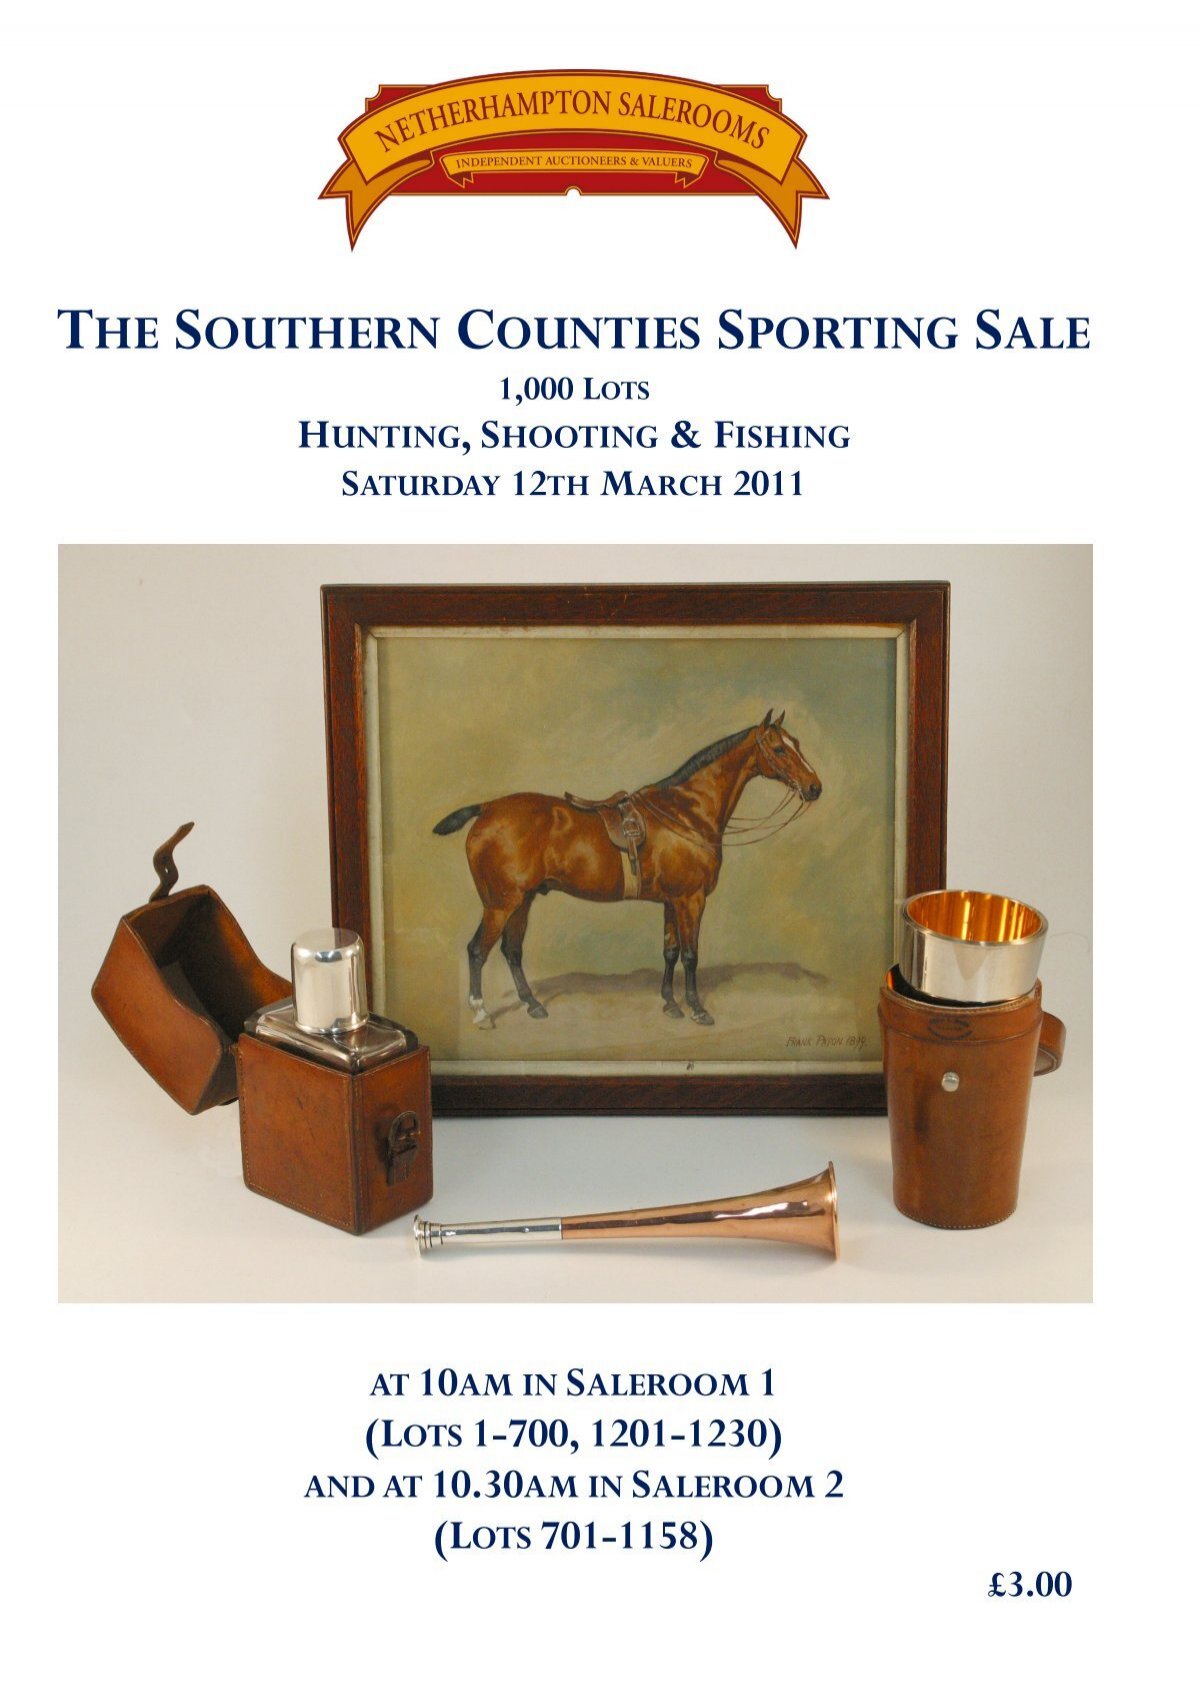 THE SOUTHERN COUNTIES SPORTING SALE - Auction Mart